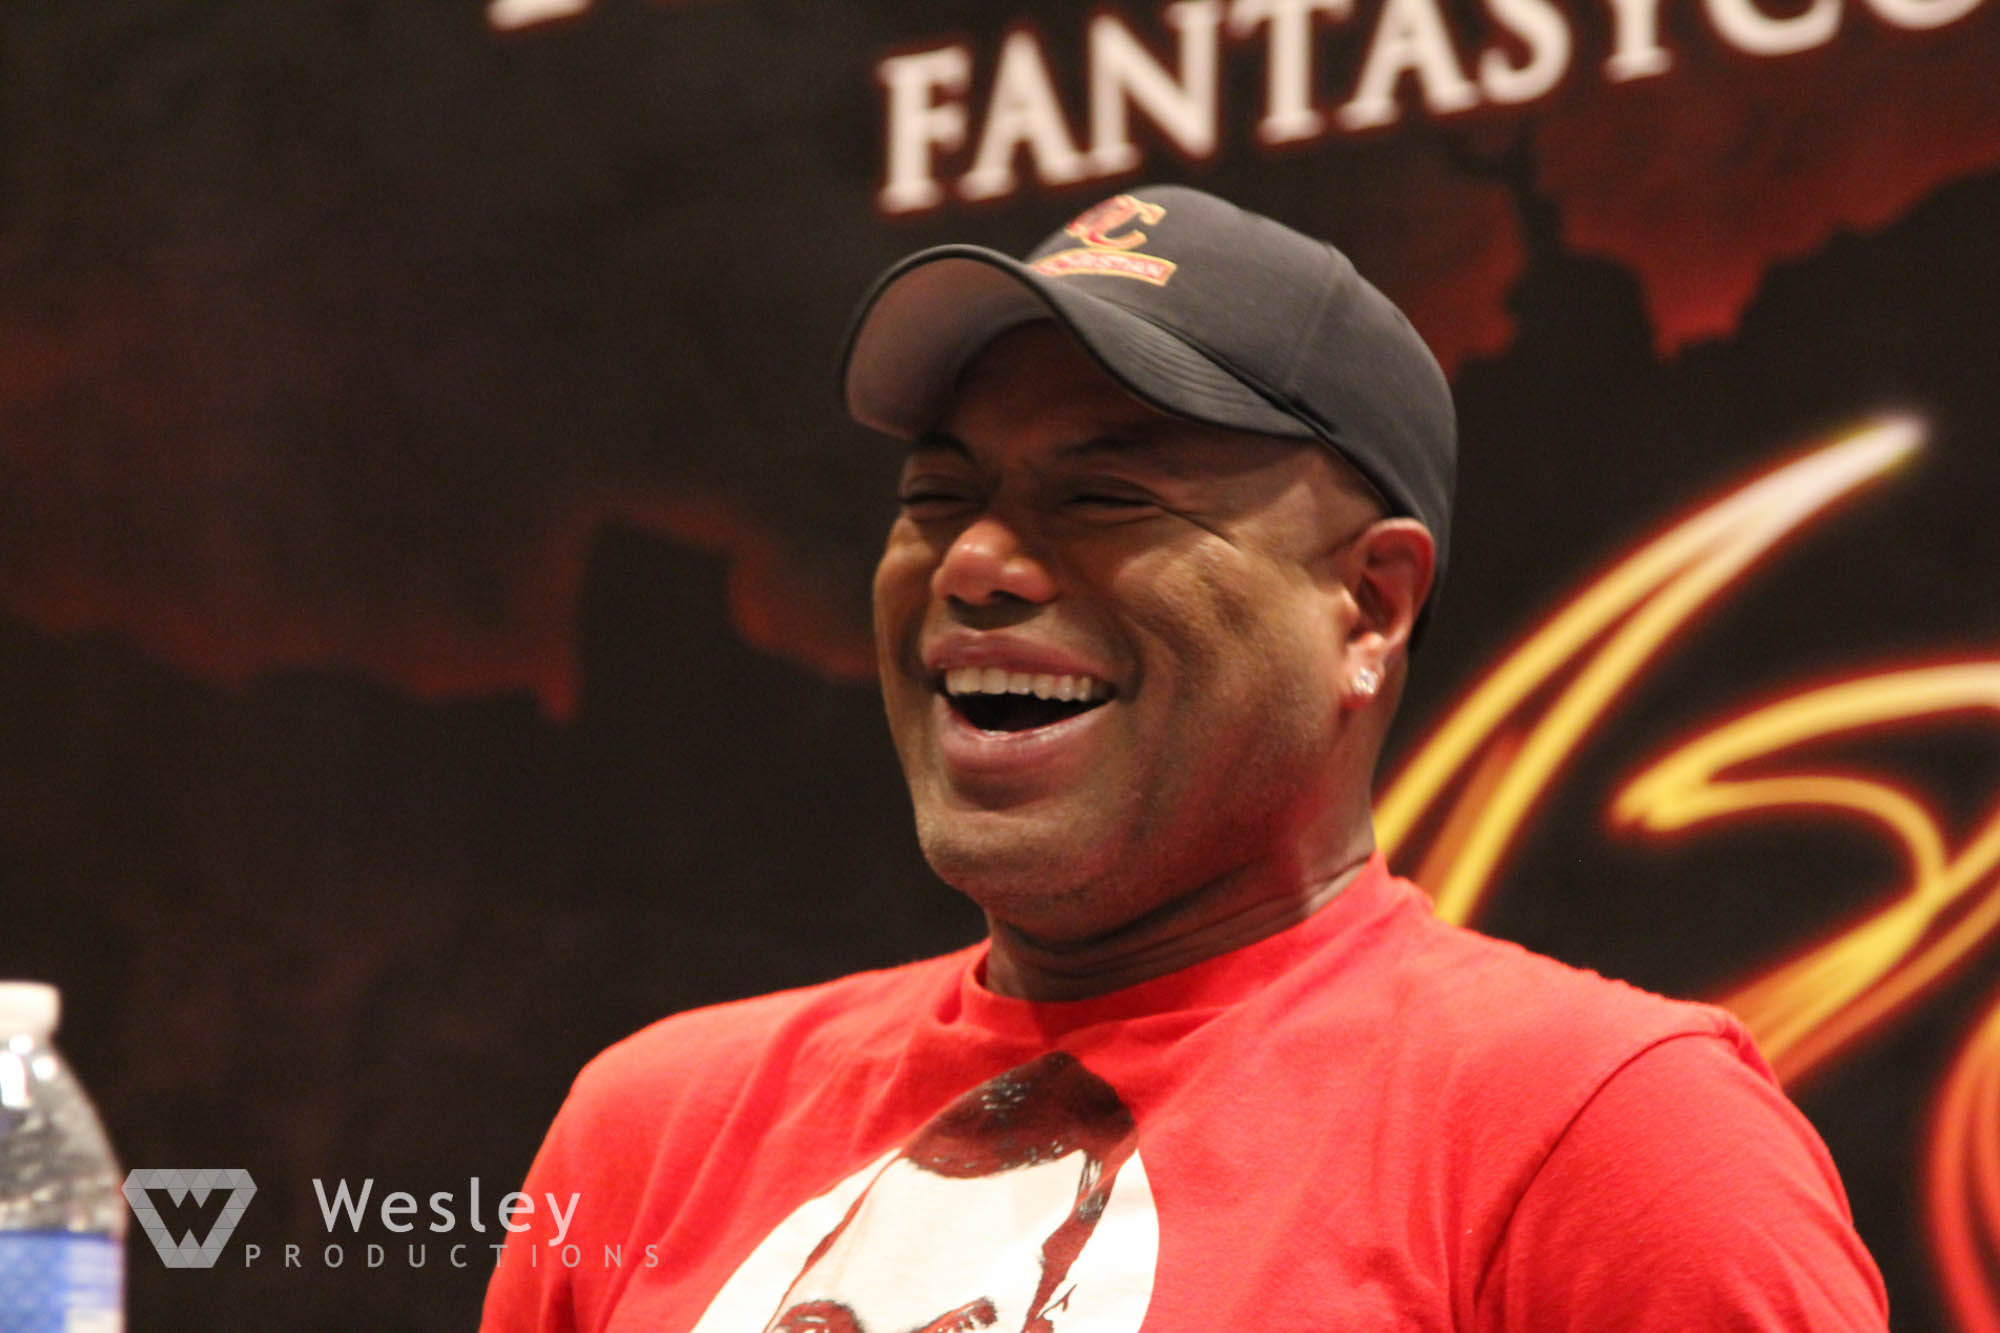 200: Christopher Judge, Teal'c in Stargate SG-1 (Interview